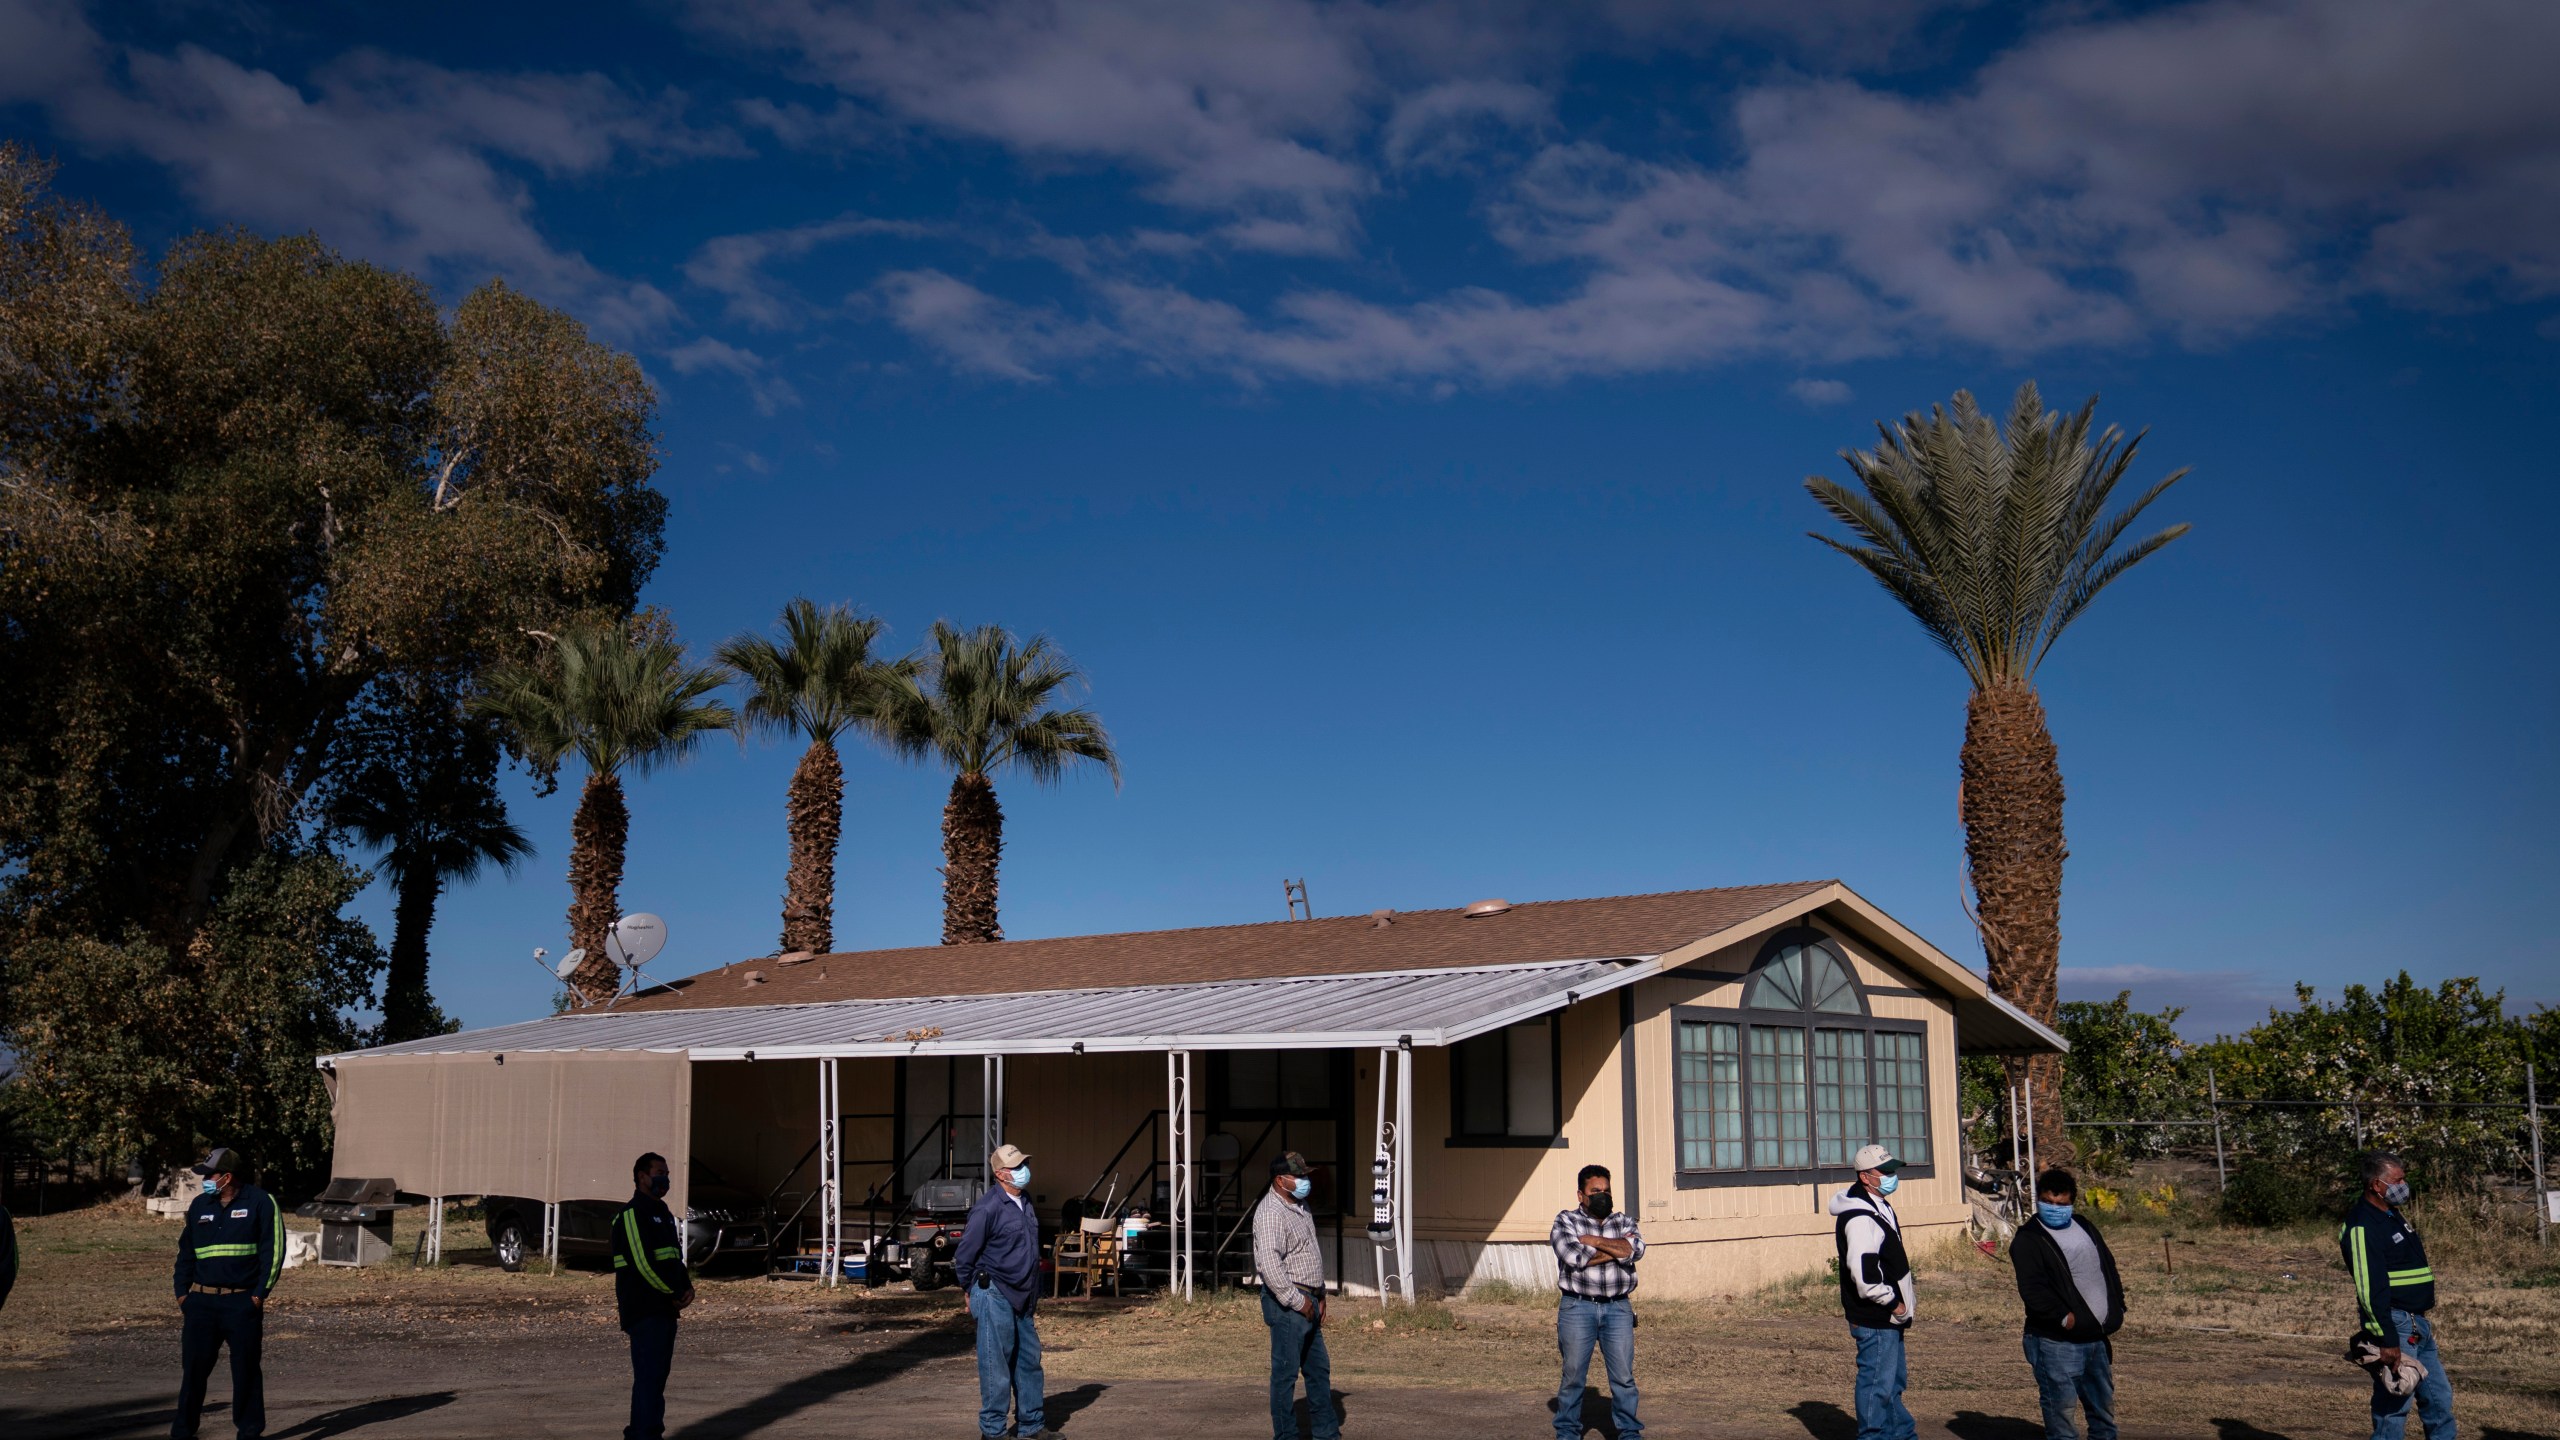 FILE - Farm workers wait in line at Tudor Ranch in Mecca, Calif., Jan. 21, 2021. Every year, heat kills more people than floods, hurricanes and tornadoes combined, and experts warn that extreme heat will become more intense, frequent and lethal with climate change. (AP Photo/Jae C. Hong, File)